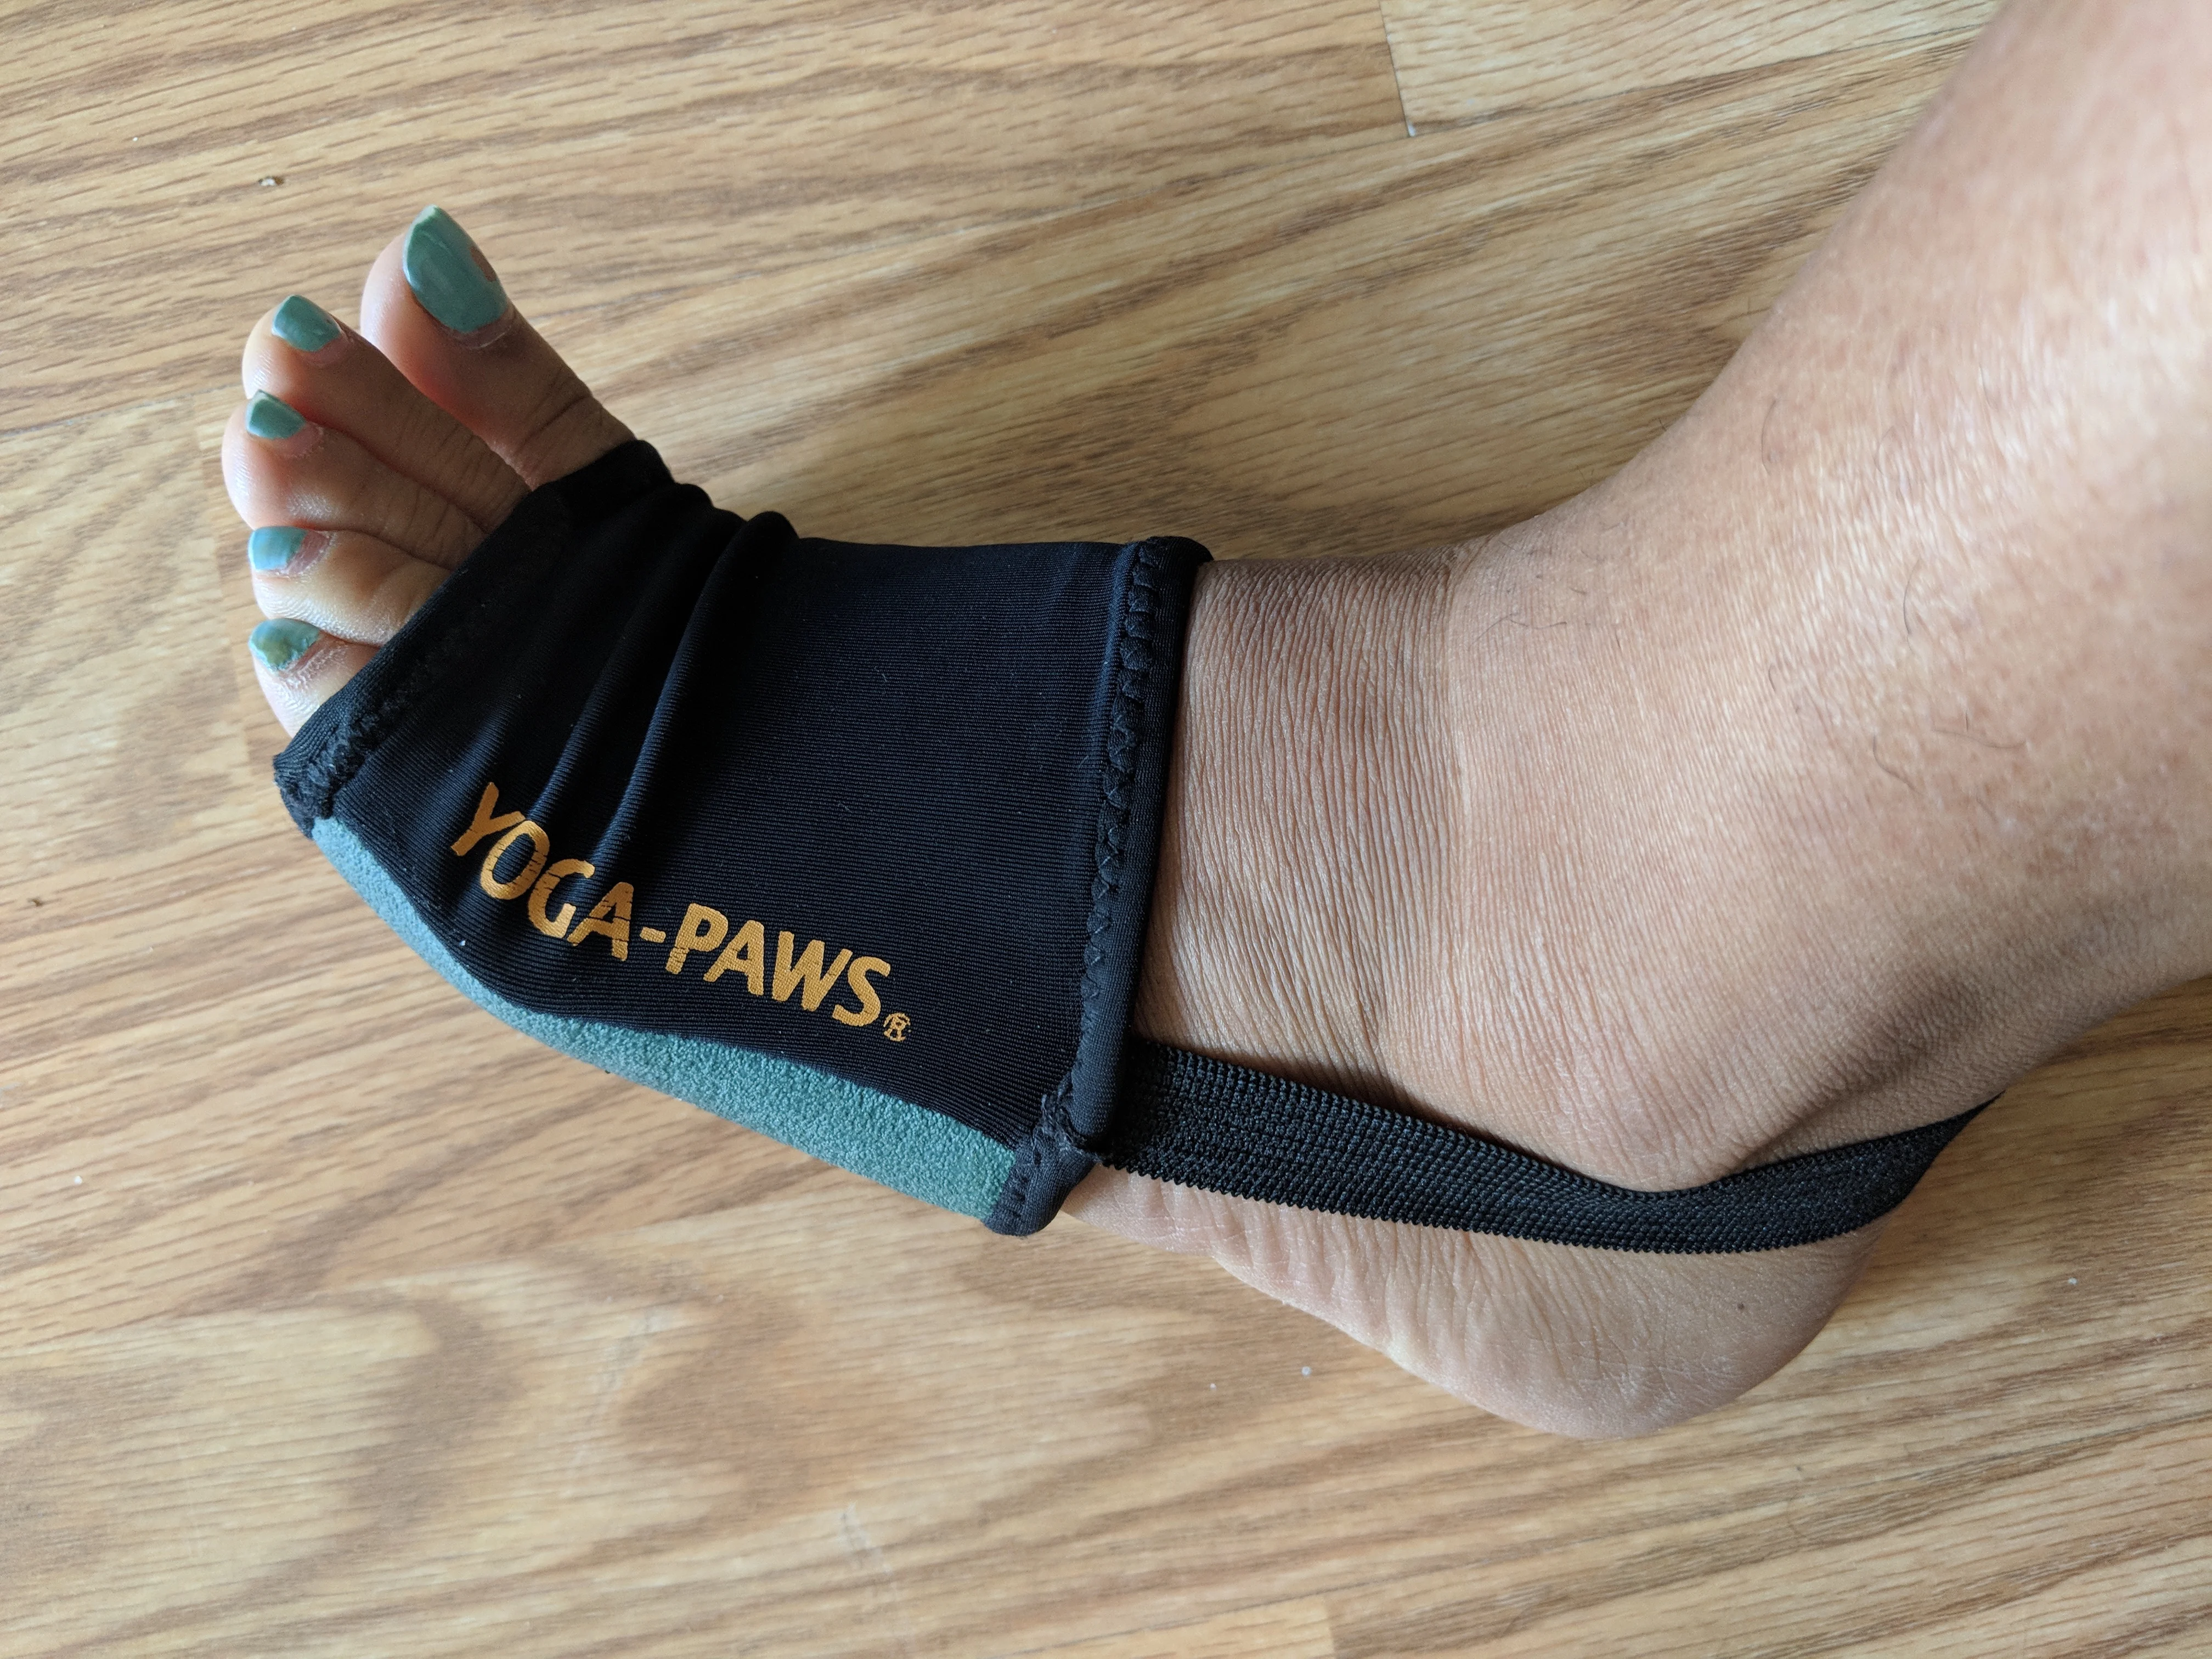 Yoga Paws Review - Wearable Foot Pads (try on)